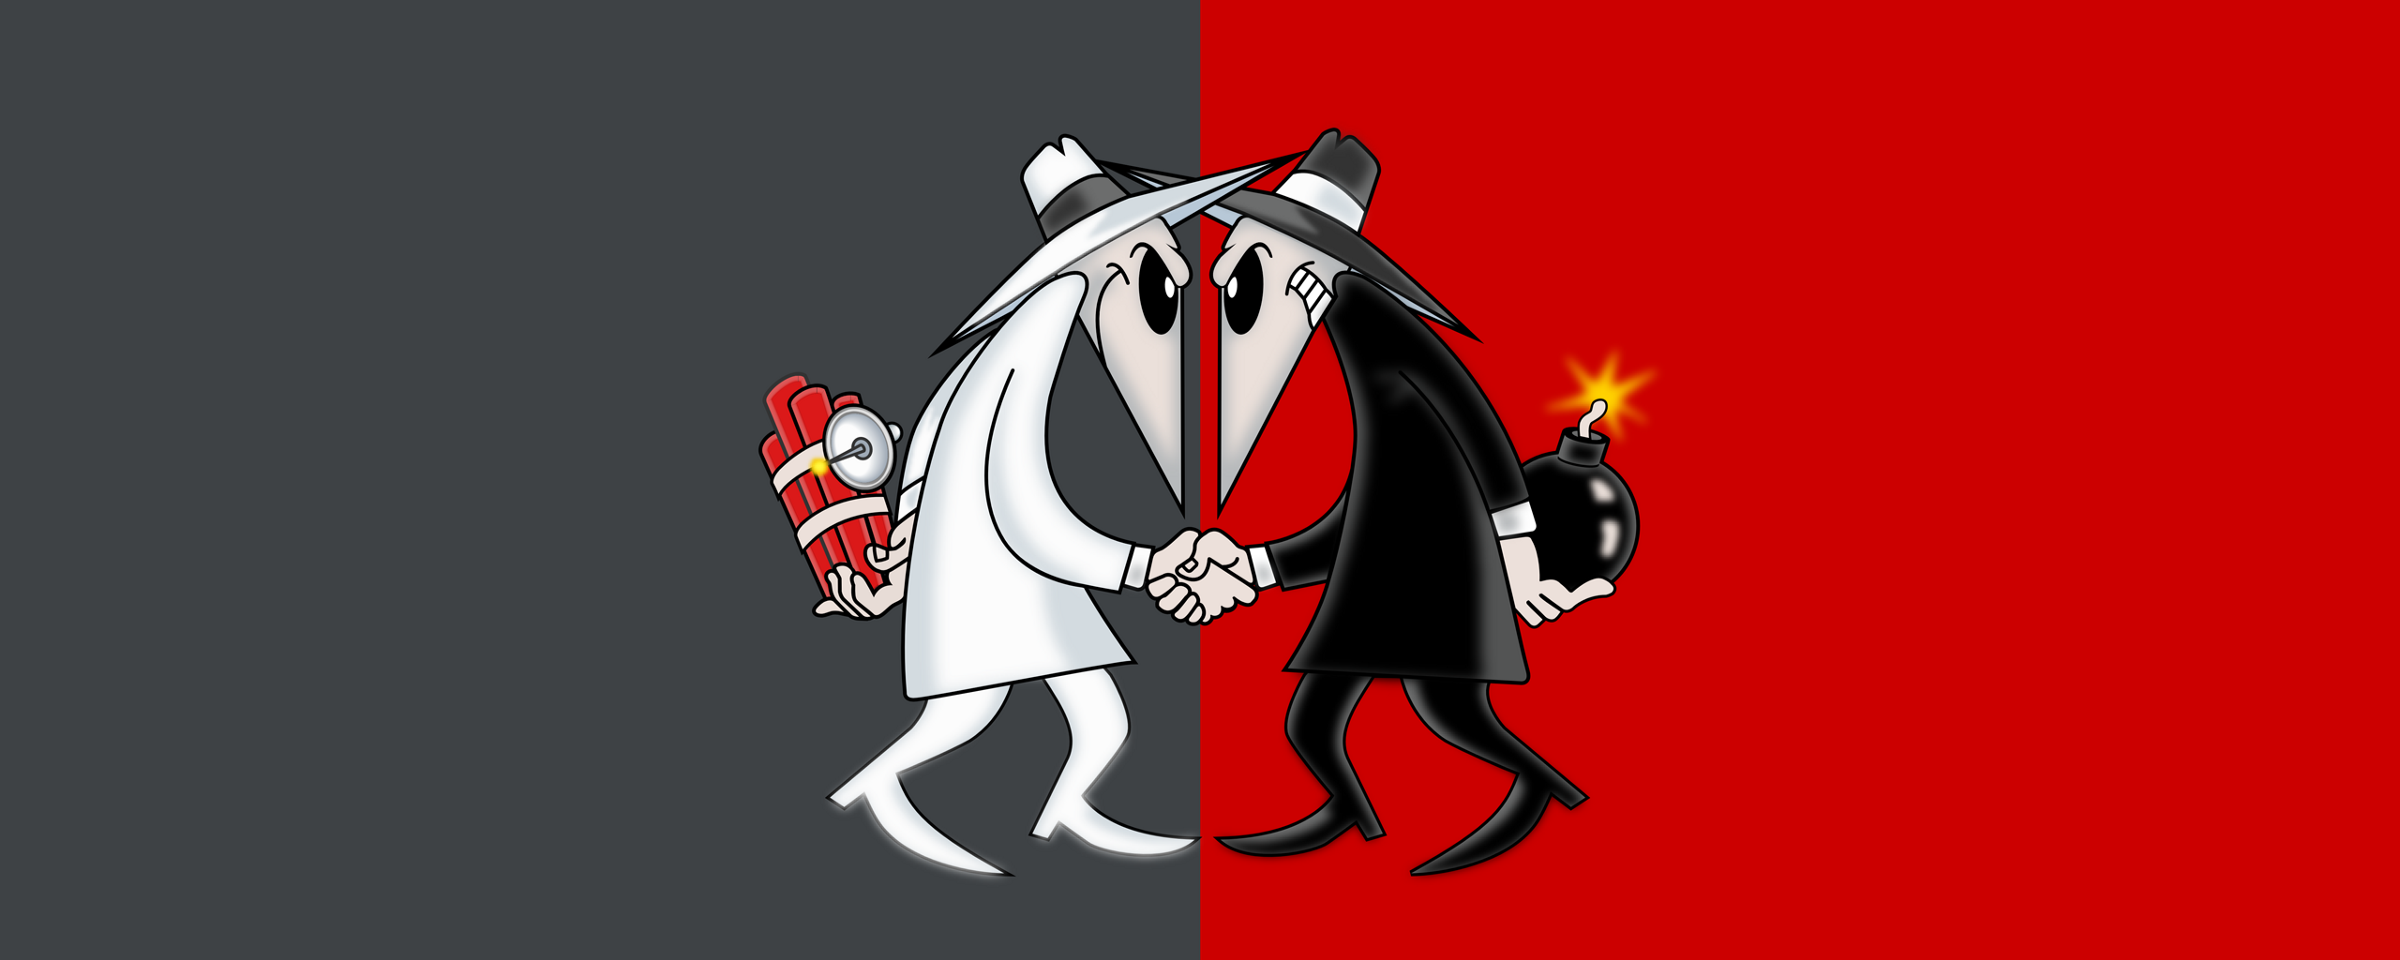 An image of the two spys from the comic “Spy vs. Spy” shaking hands